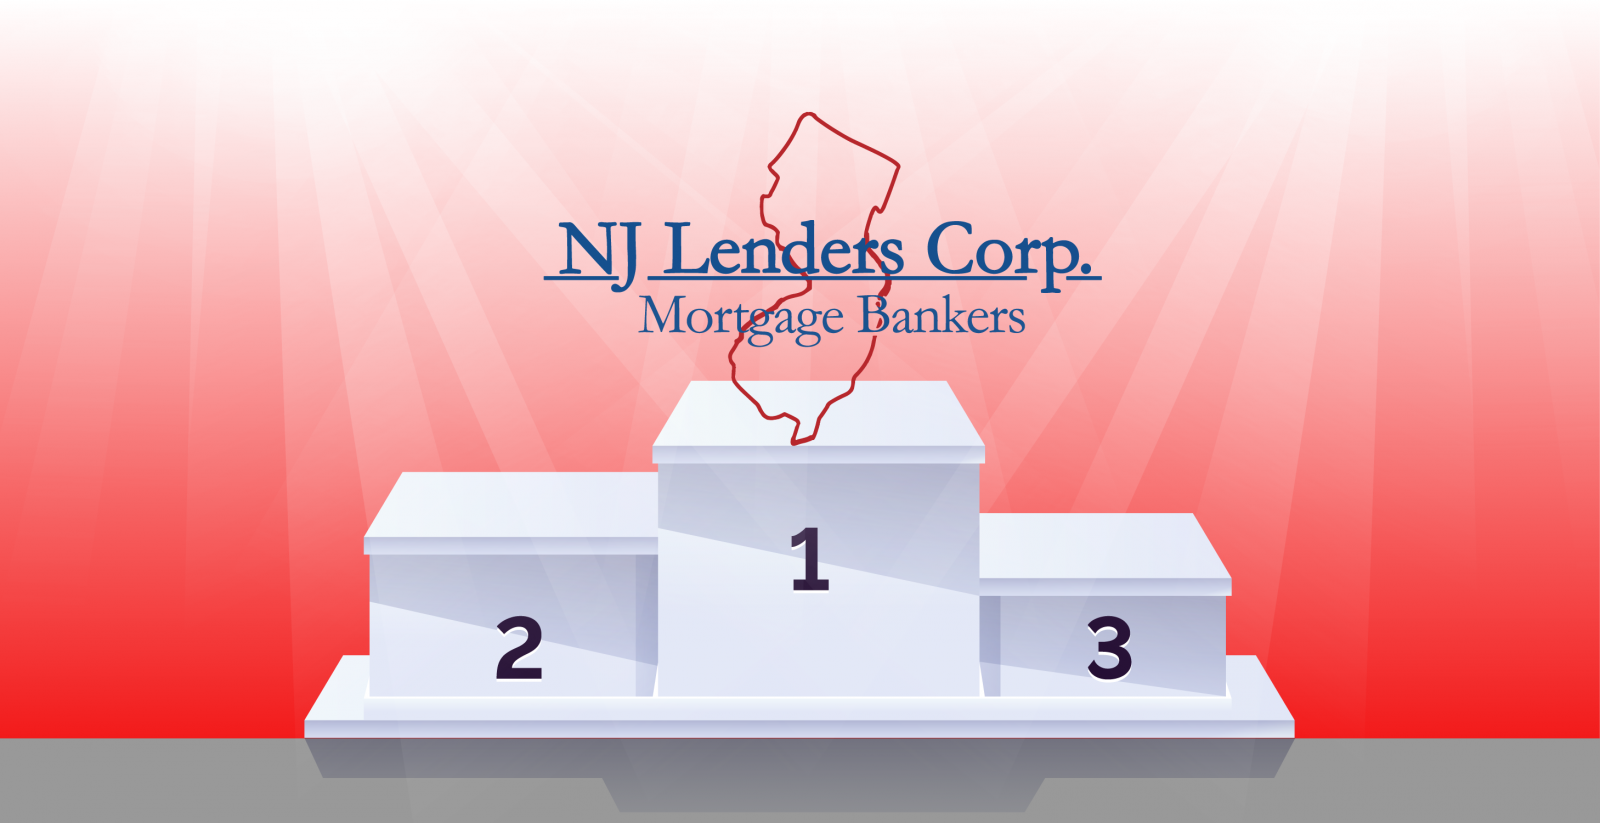 What Makes NJ Lenders Corp. the Best Mortgage Lender